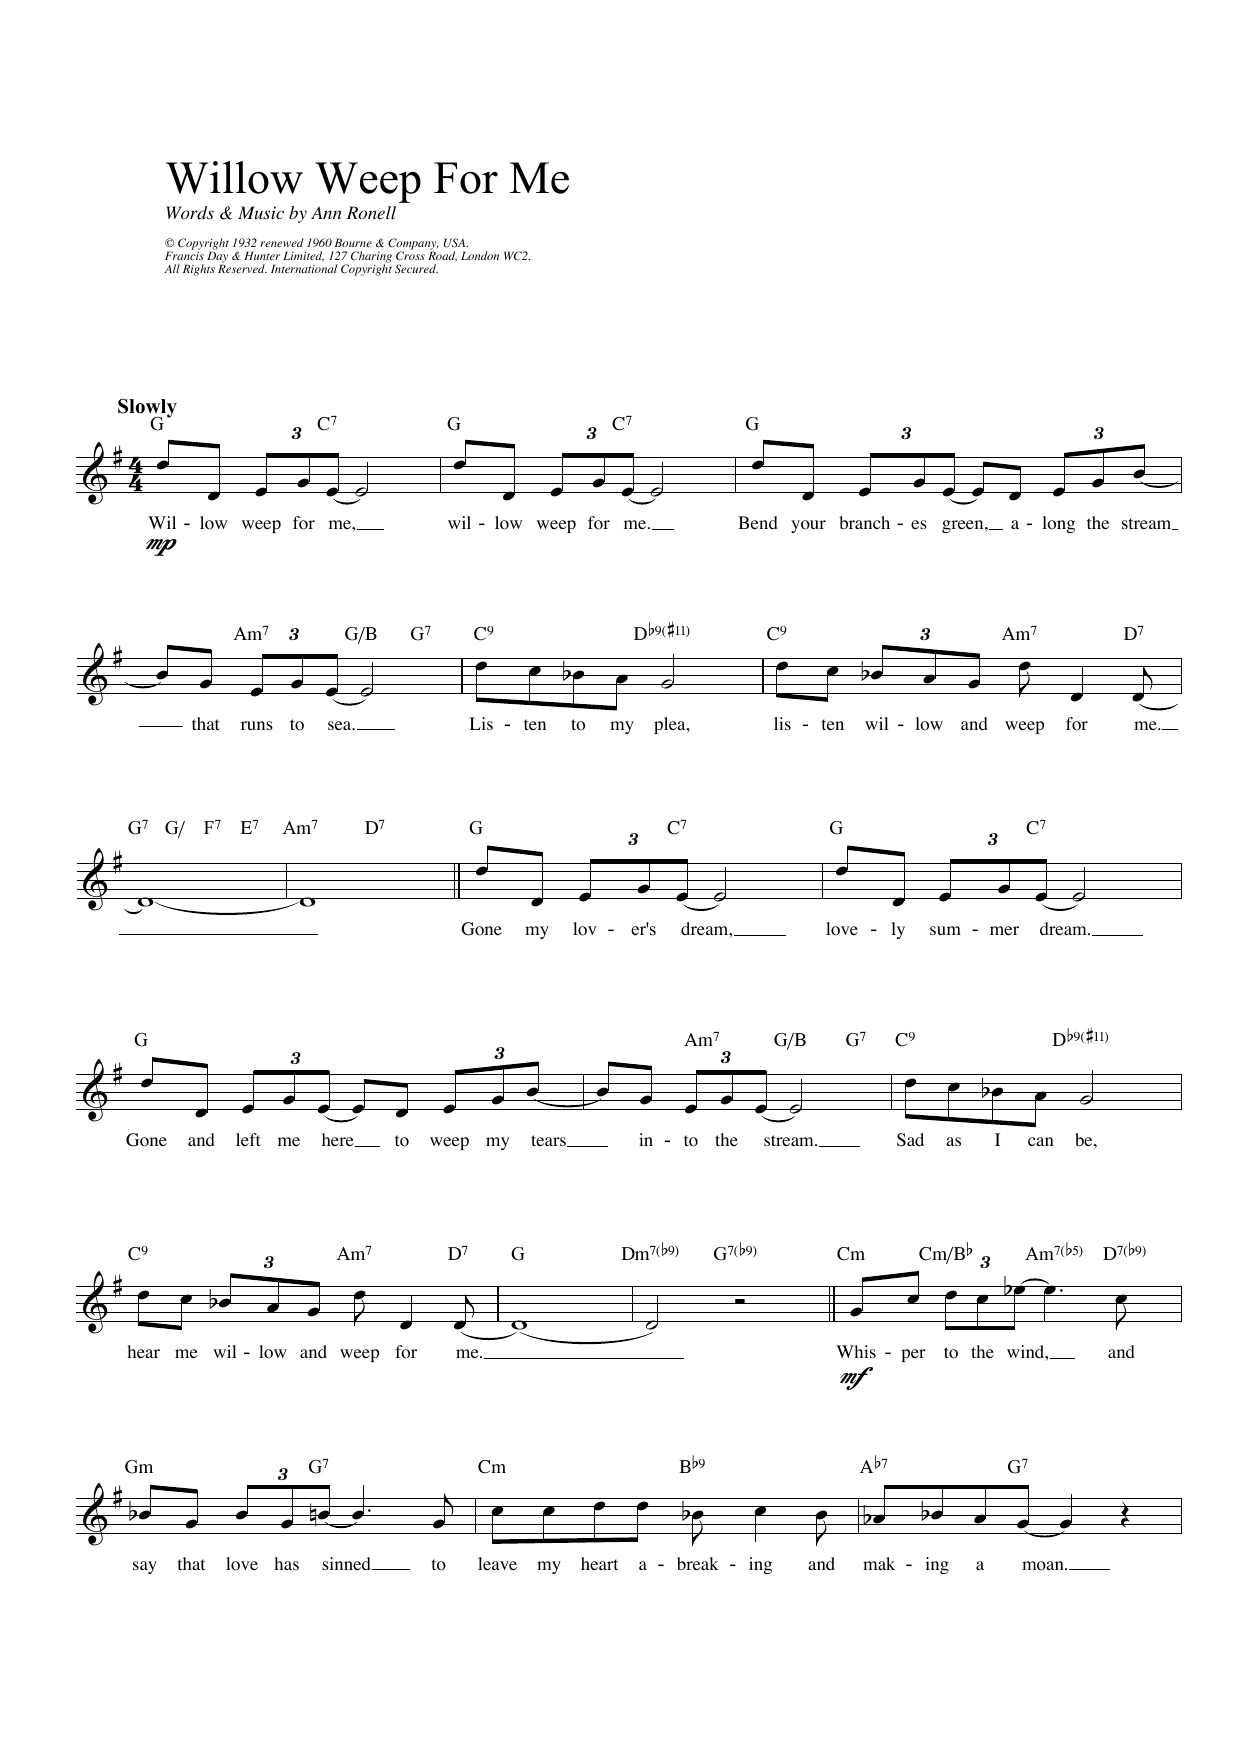 Ann Ronell Willow Weep For Me sheet music notes printable PDF score